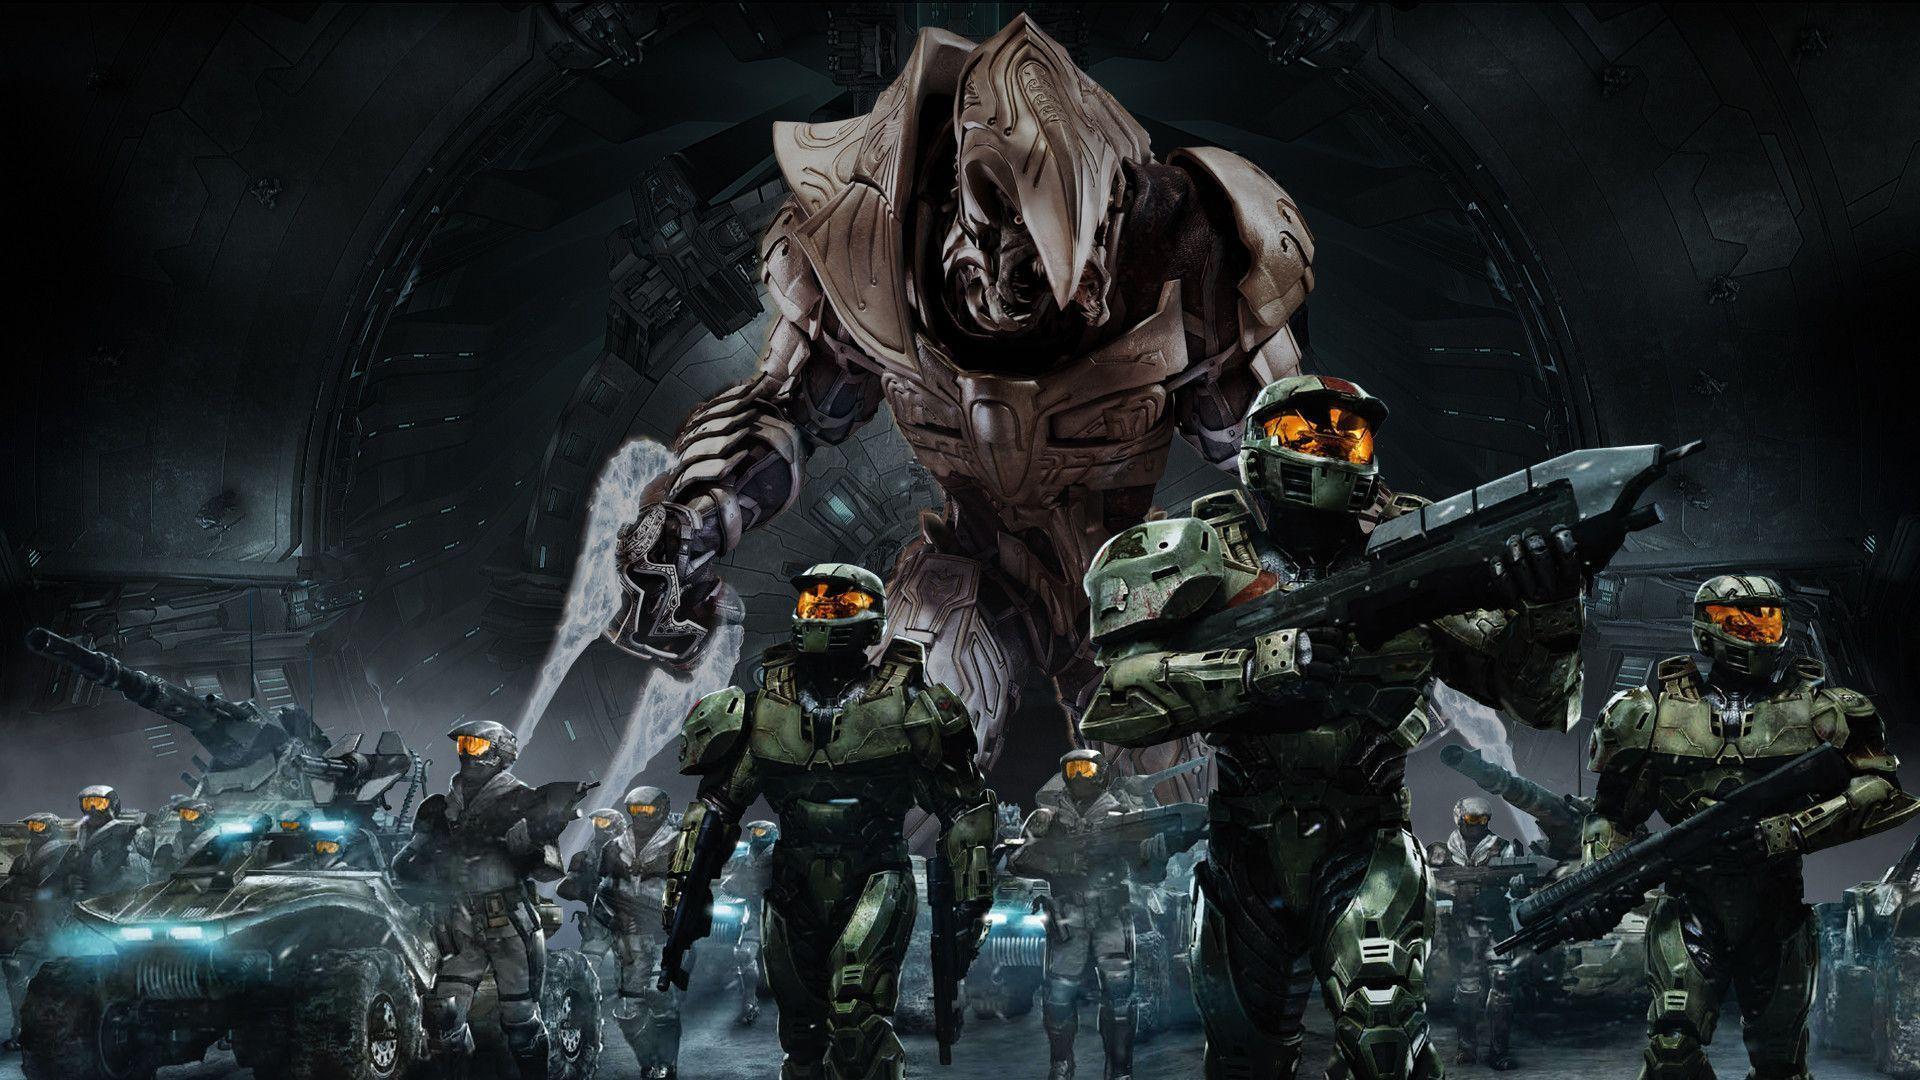 Wallpaper For > Cool Halo Wars Wallpaper